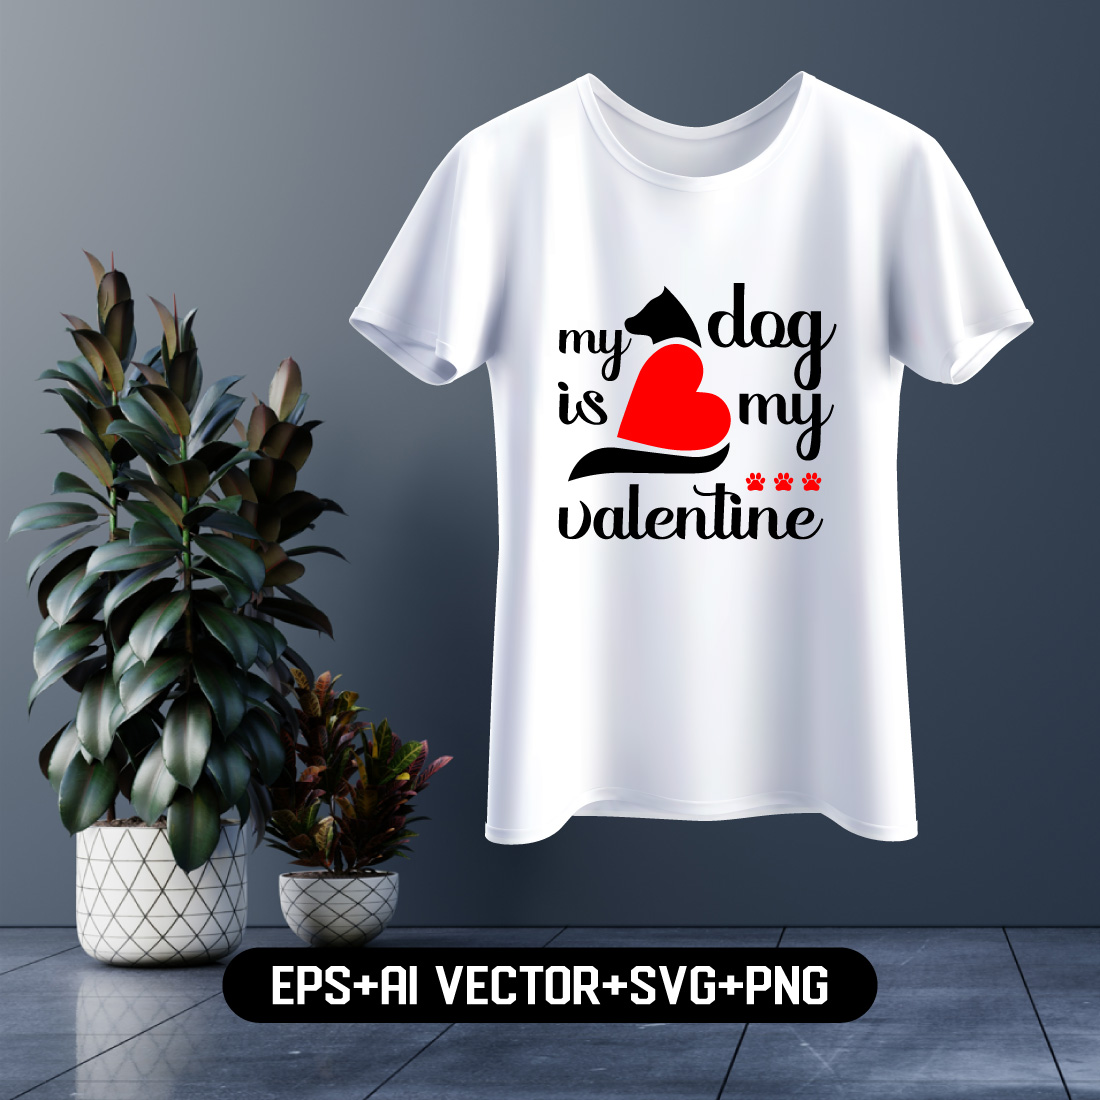 My Dog is My Valentine - T-Shirt Design cover image.